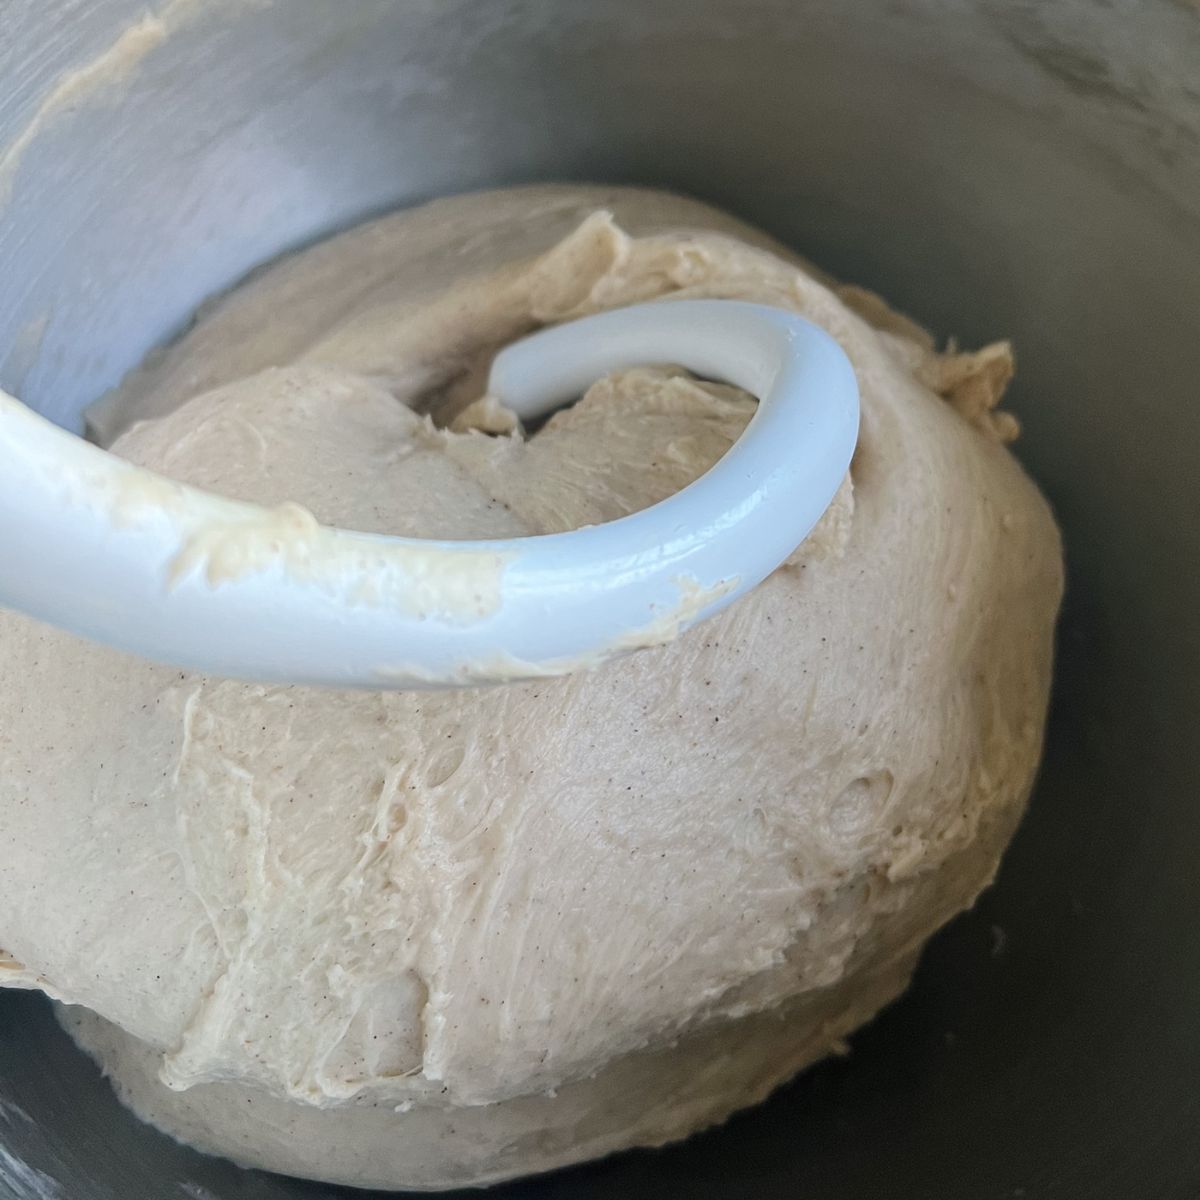 Dough being kneaded in the mixing bowl with a hook attachment.